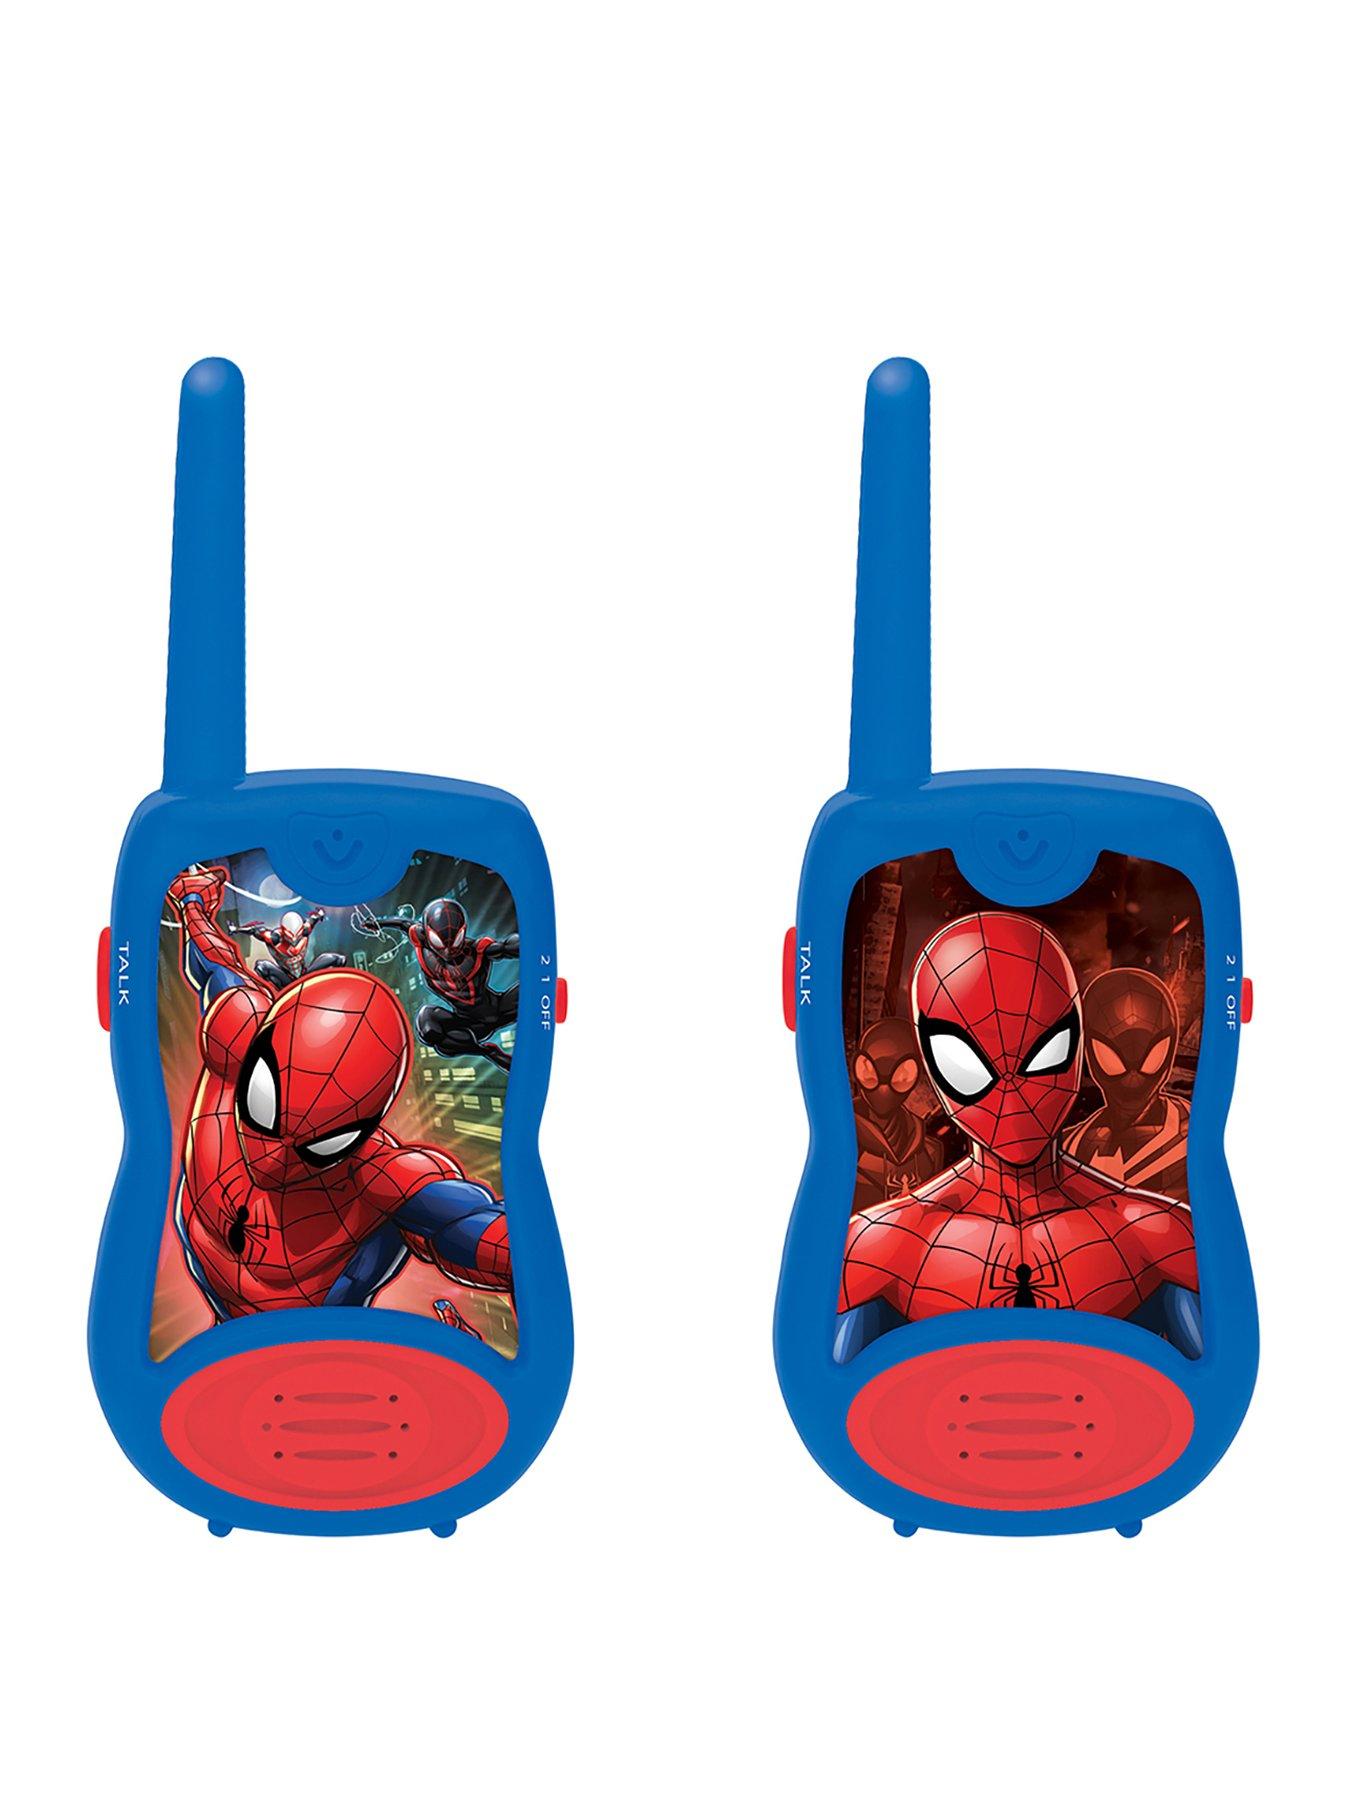 Spider-Man (2002) Walkie-Talkies that are also action figures. : r